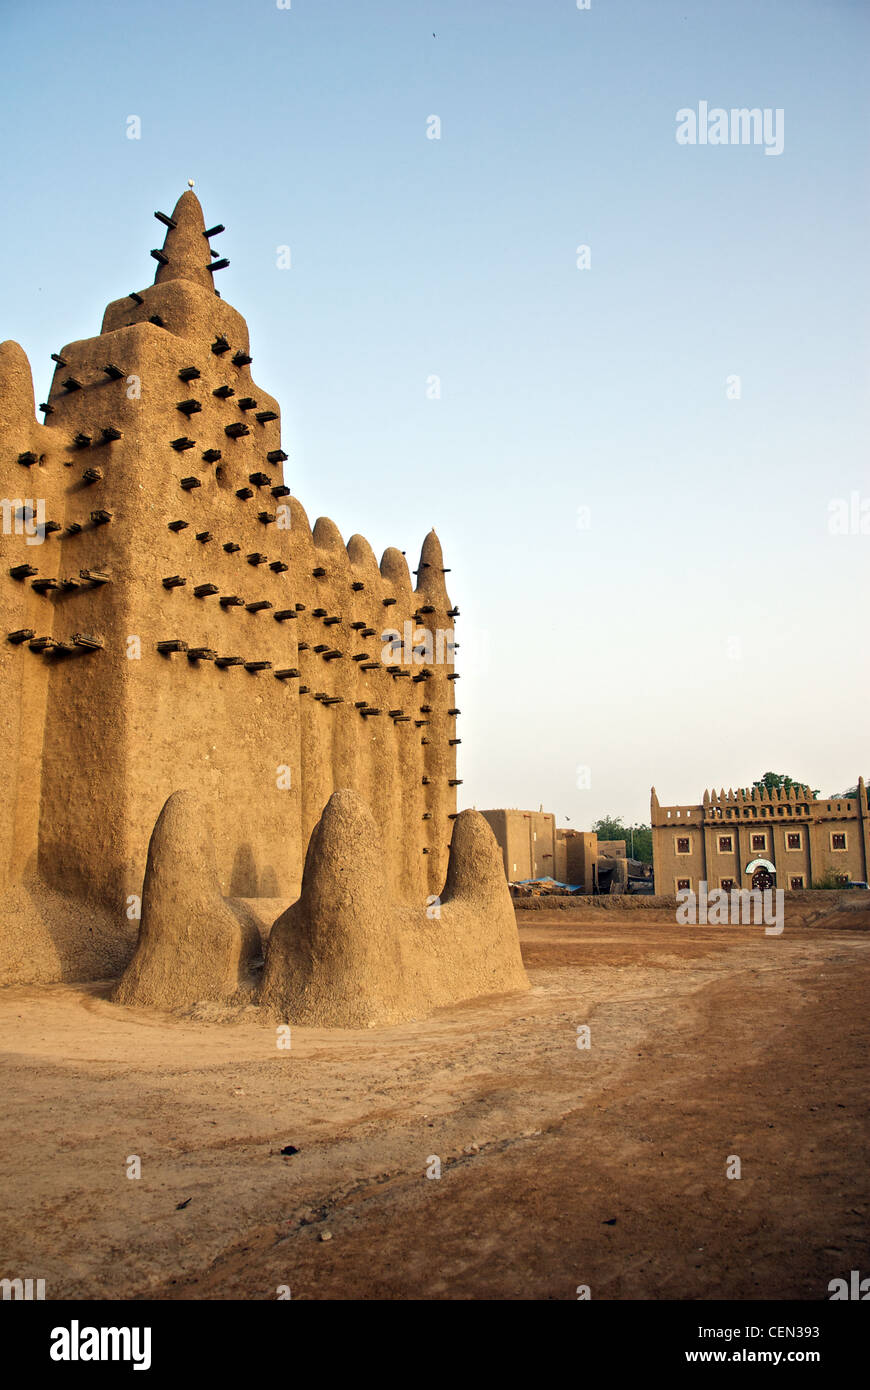 The Great Mosque of Djenne in Djenne, Africa. Stock Photo